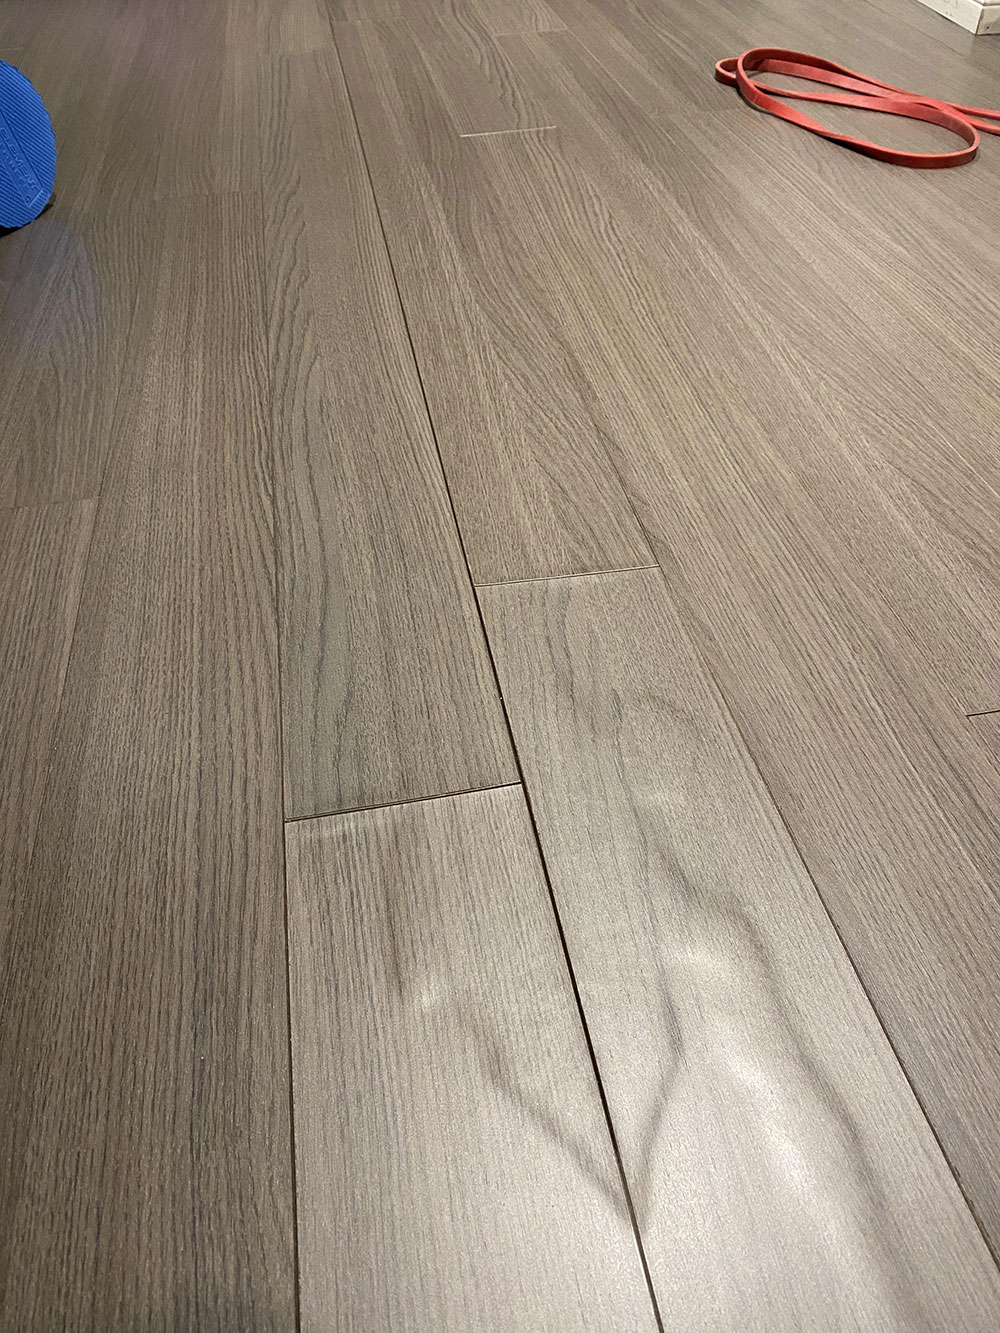 Buckling-1 DIY Guide: How to Fix Swollen Laminate Flooring in No Time